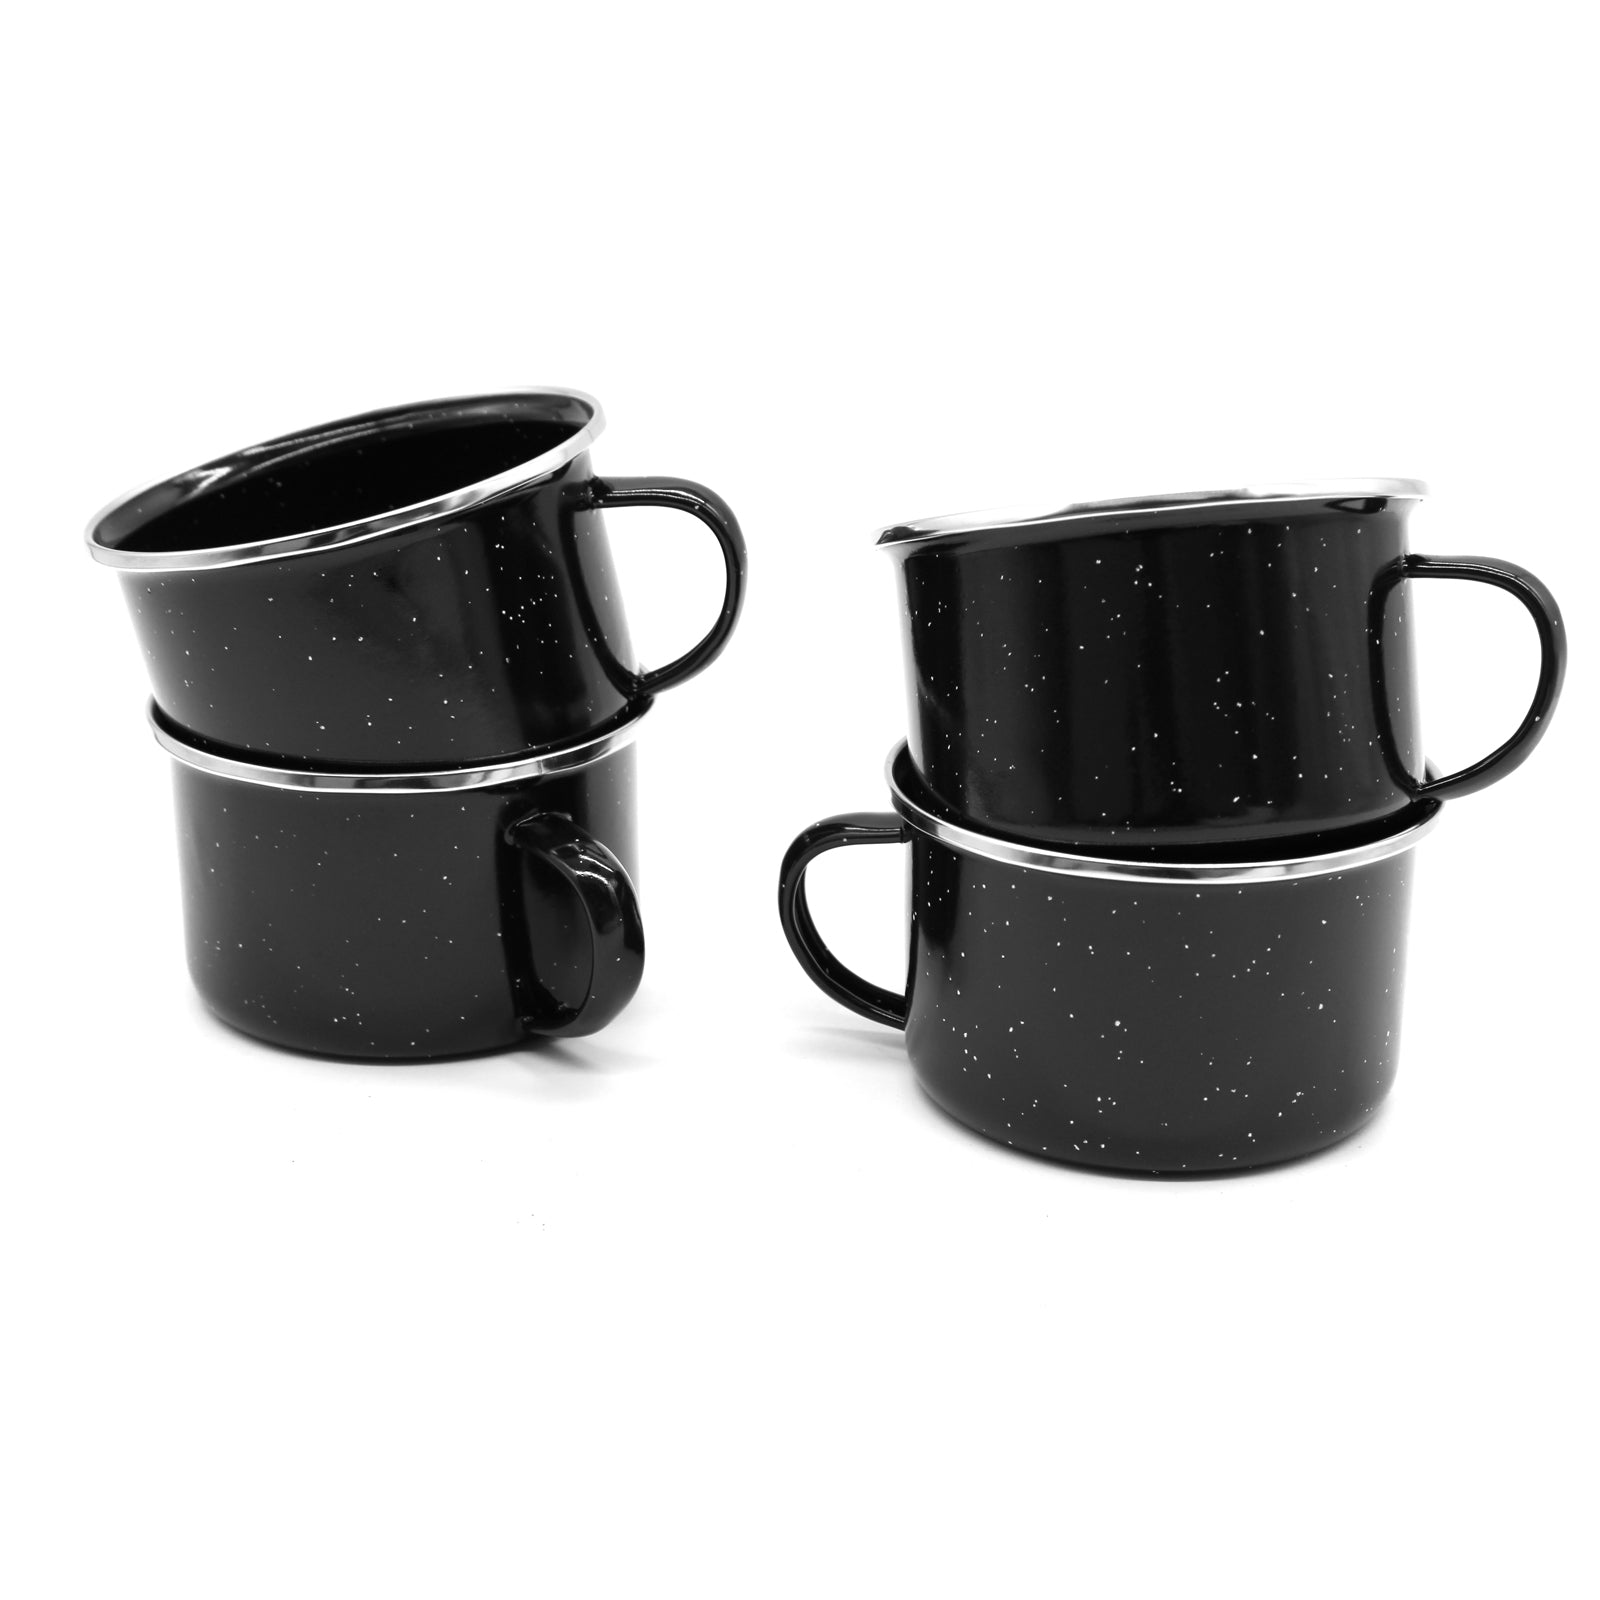 Camping set includes four cups